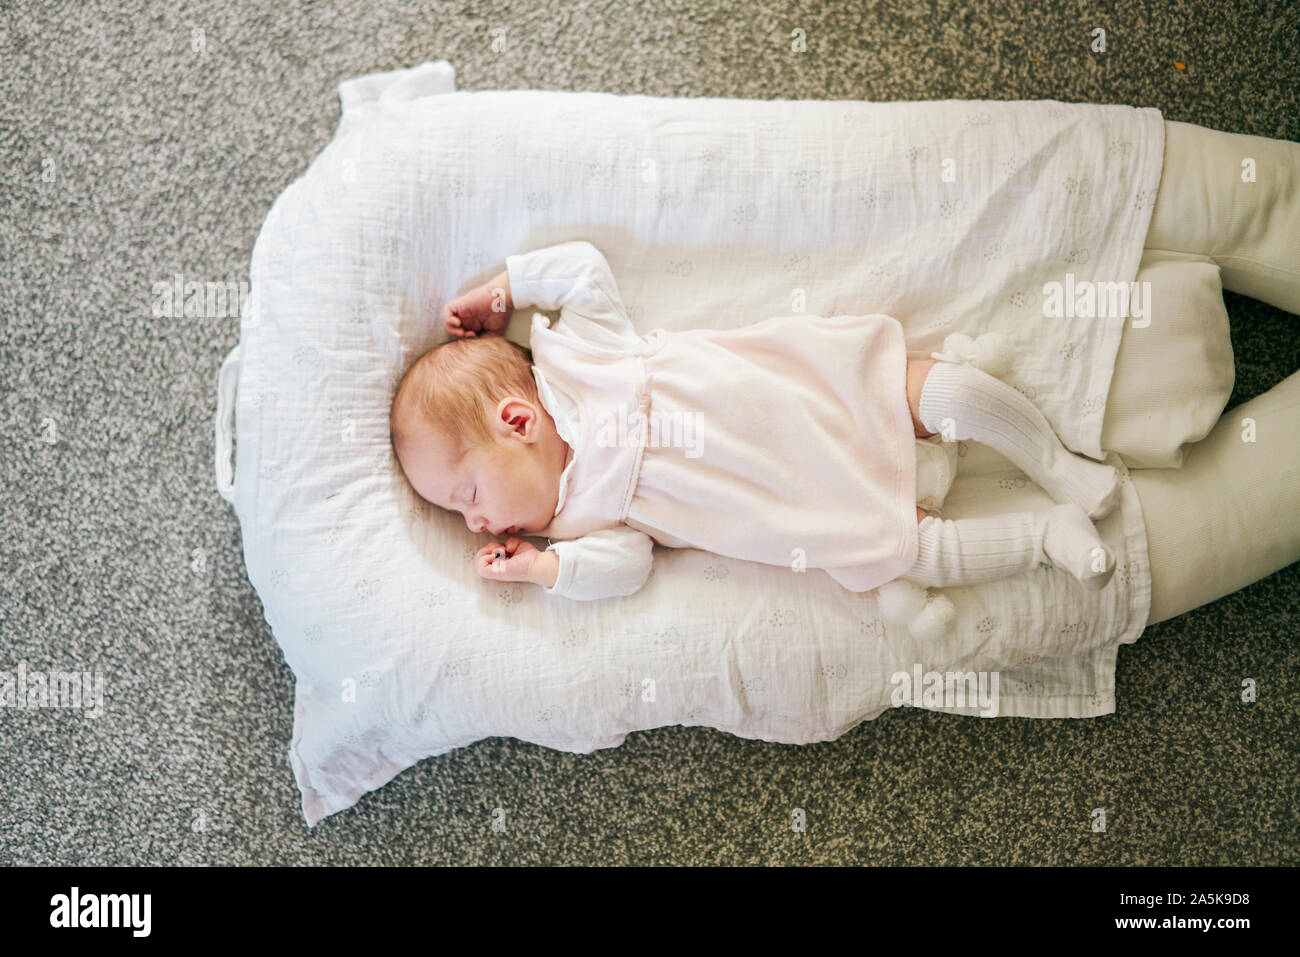 Baby sleeping on U-shaped pillow at home Stock Photo